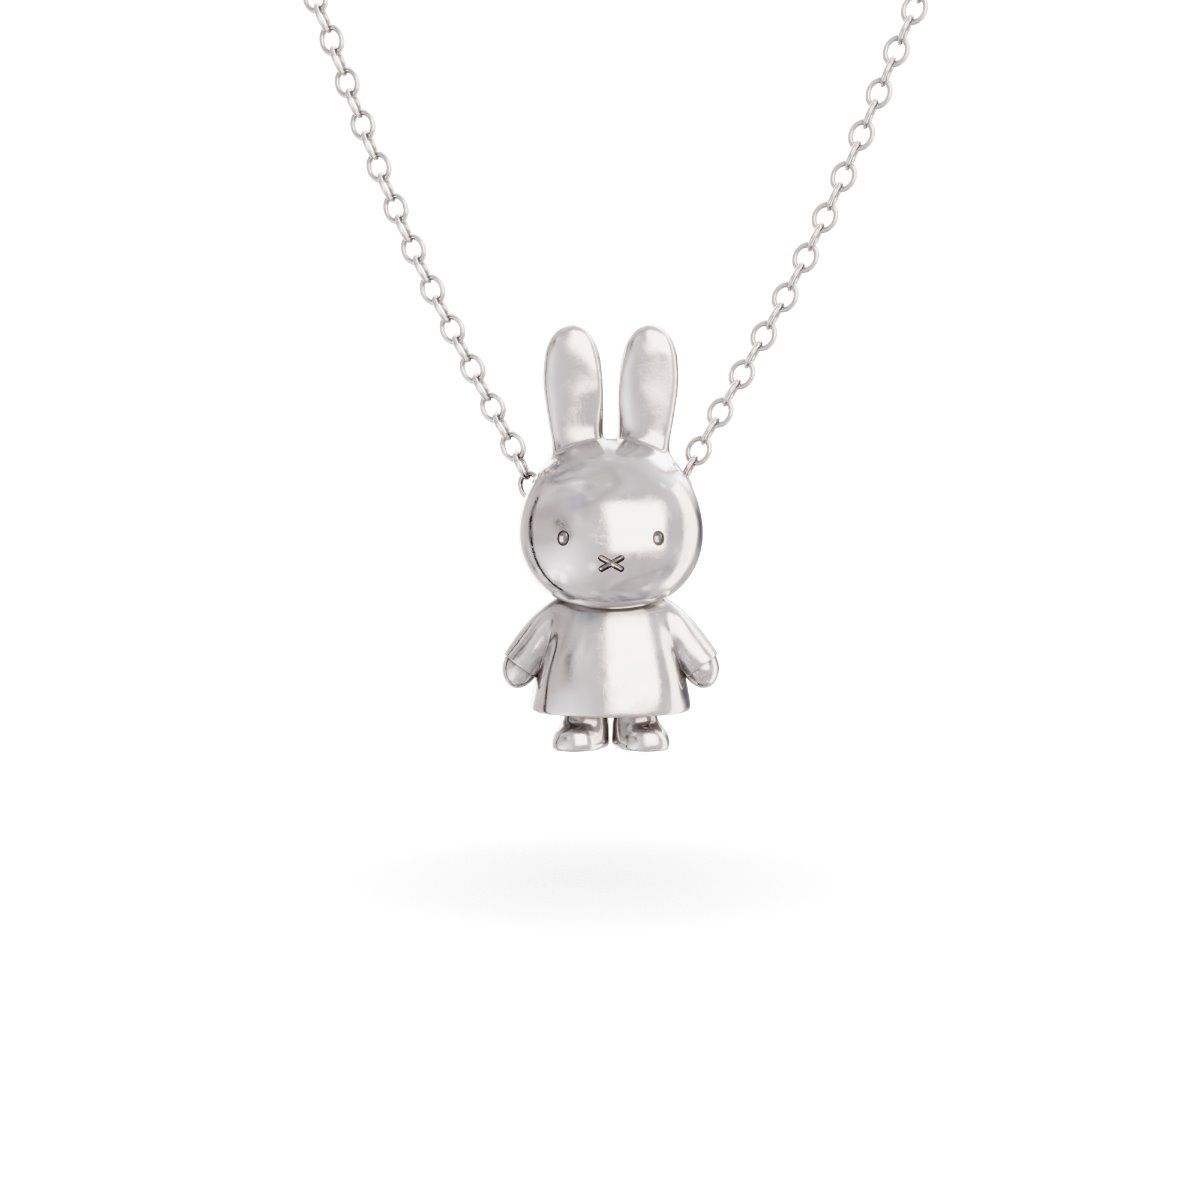 Miffy Body Charm Necklace Sterling Silver by Licensed to Charm